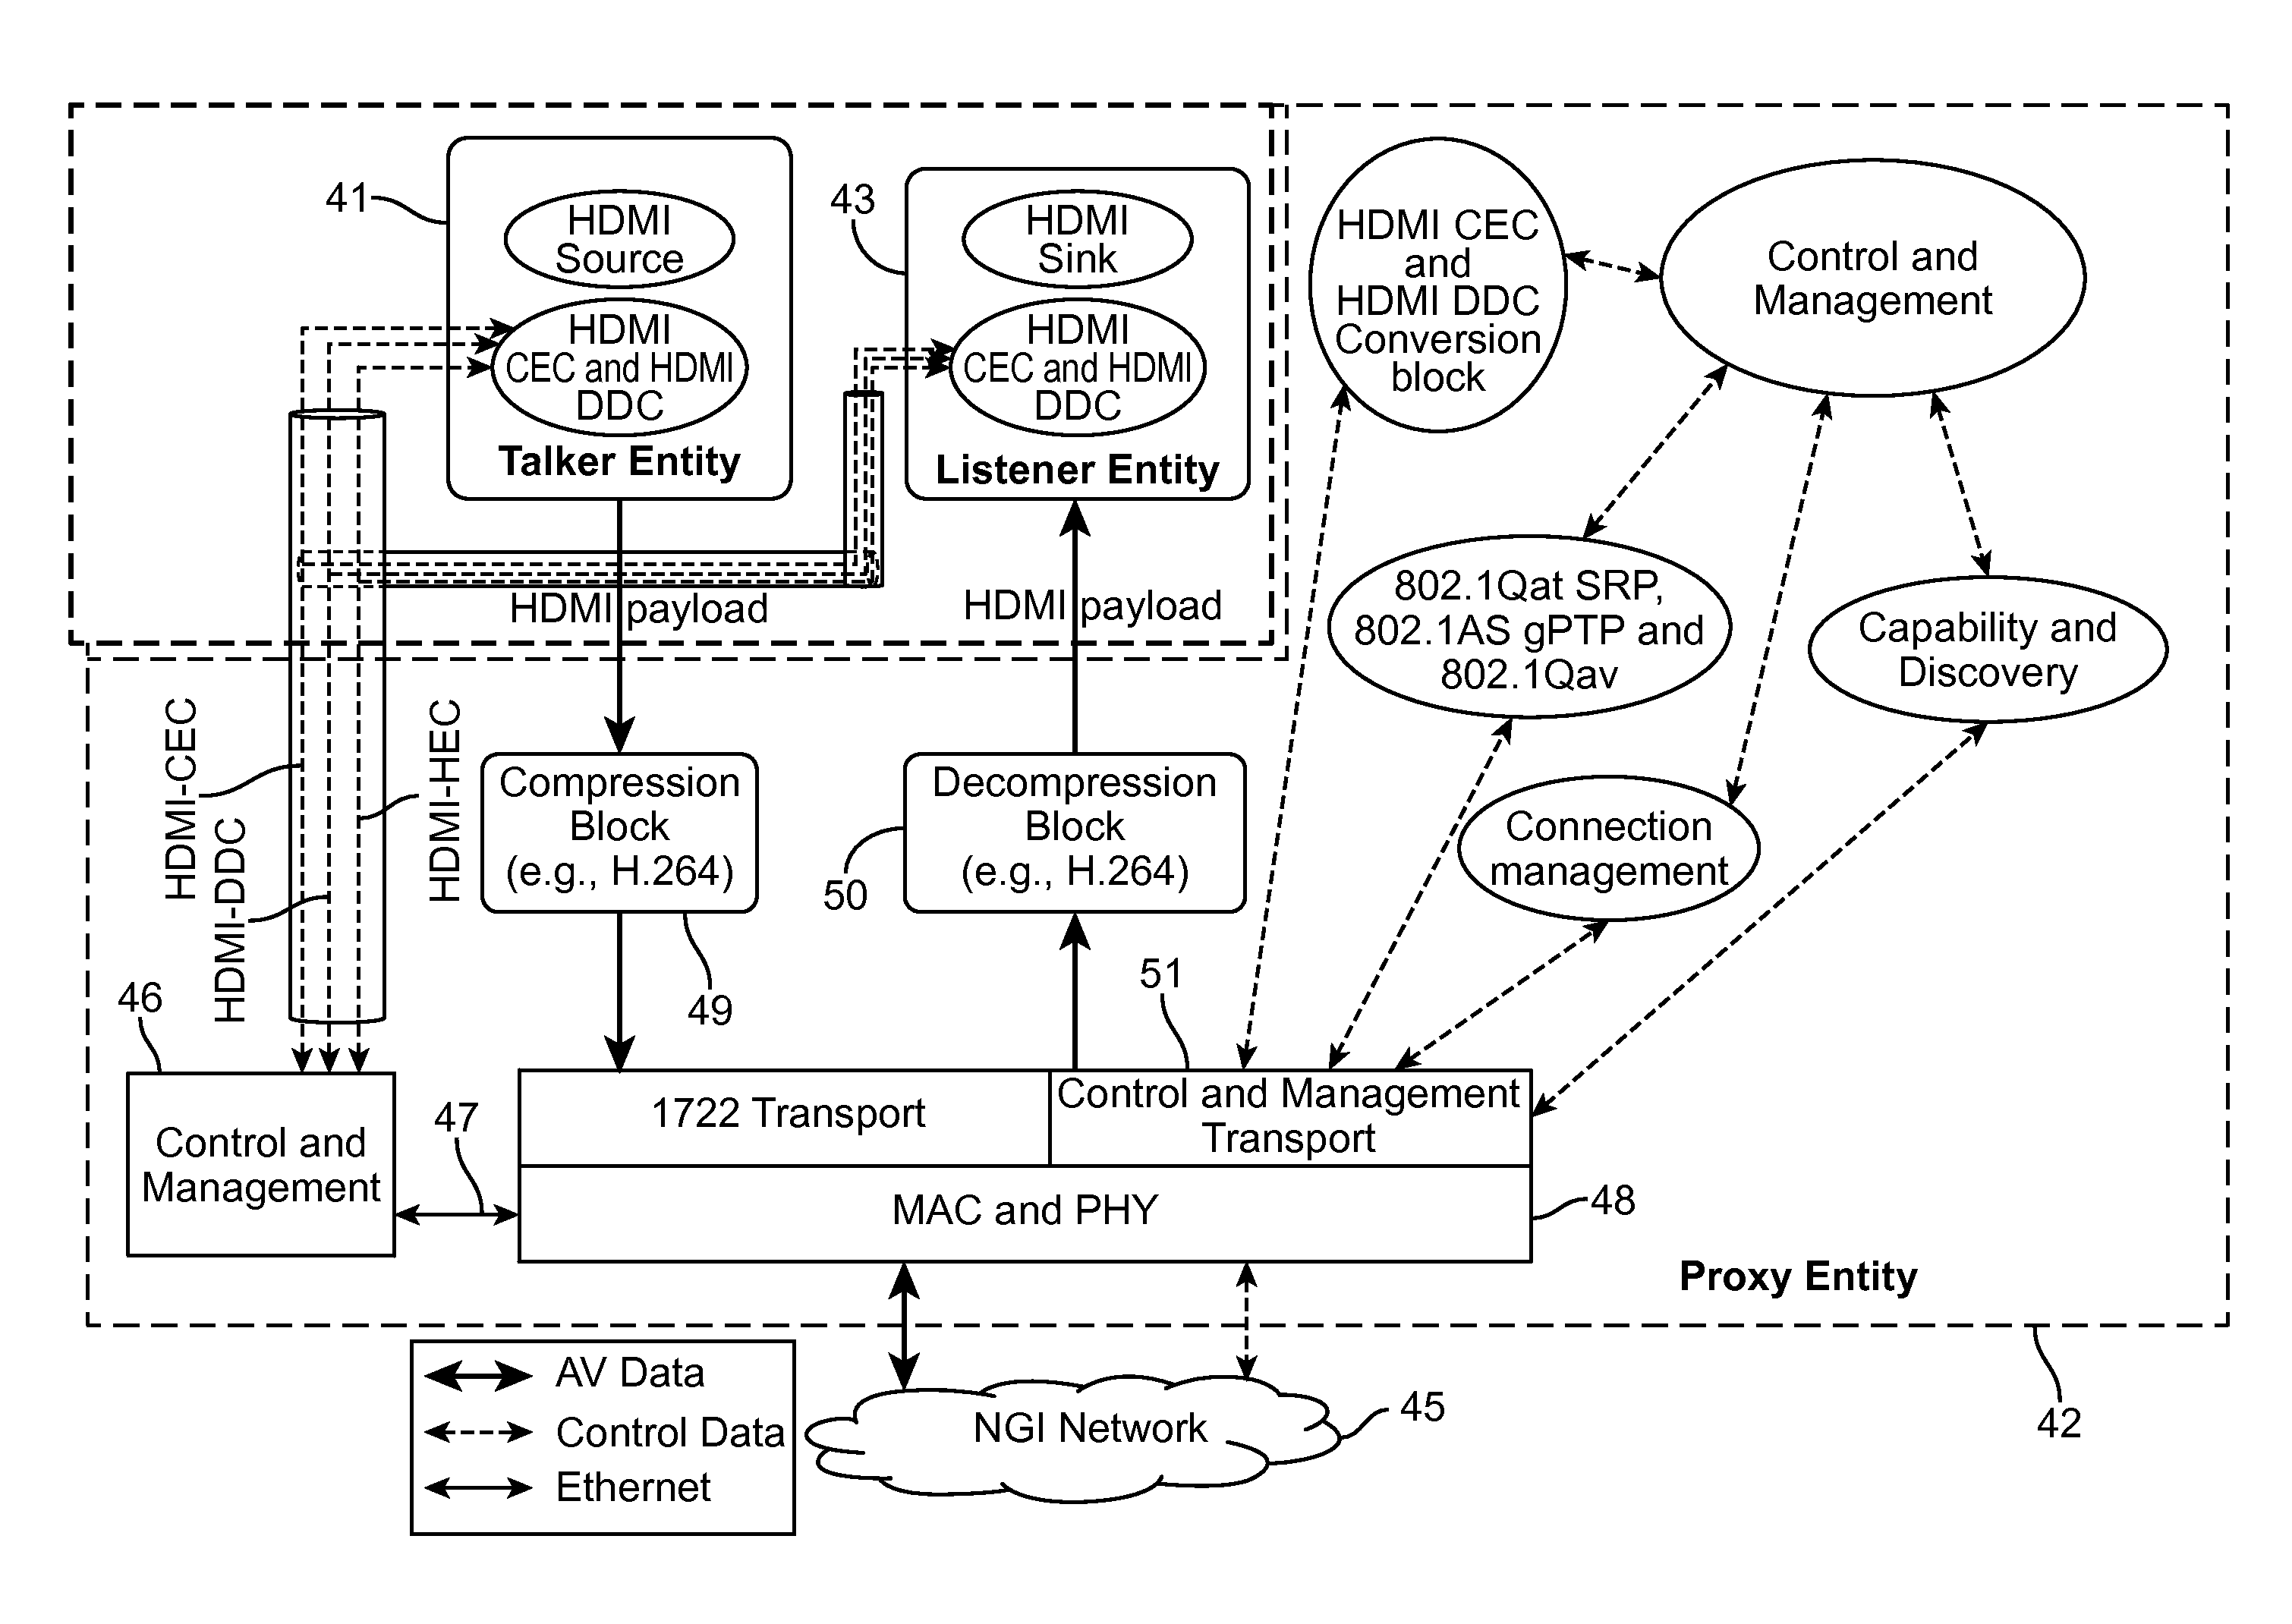 Method and system for proxy entity representation in audio/video networks